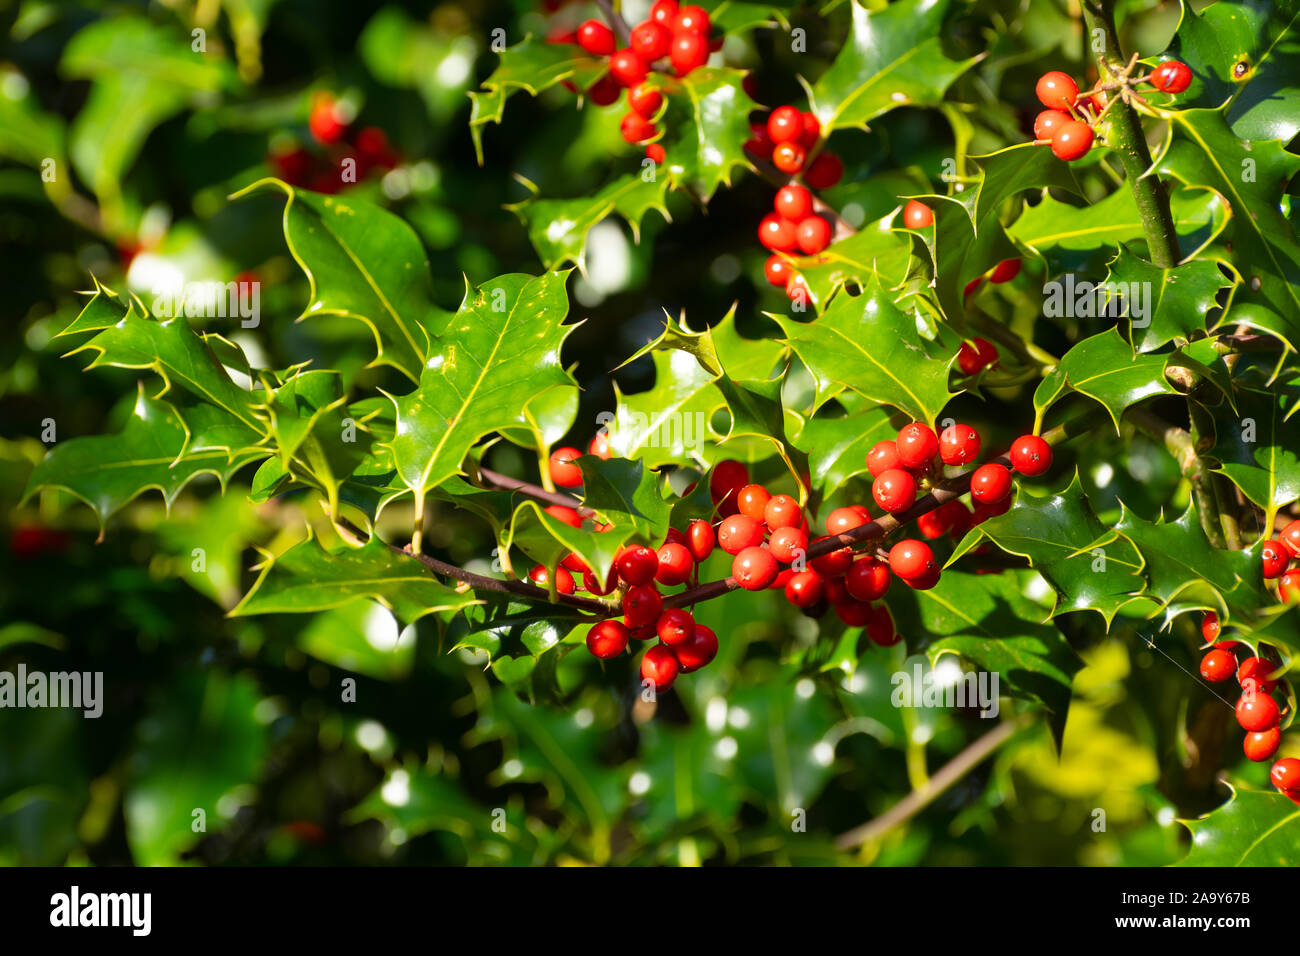 Using Holly Berries From Holly Trees For Decorations